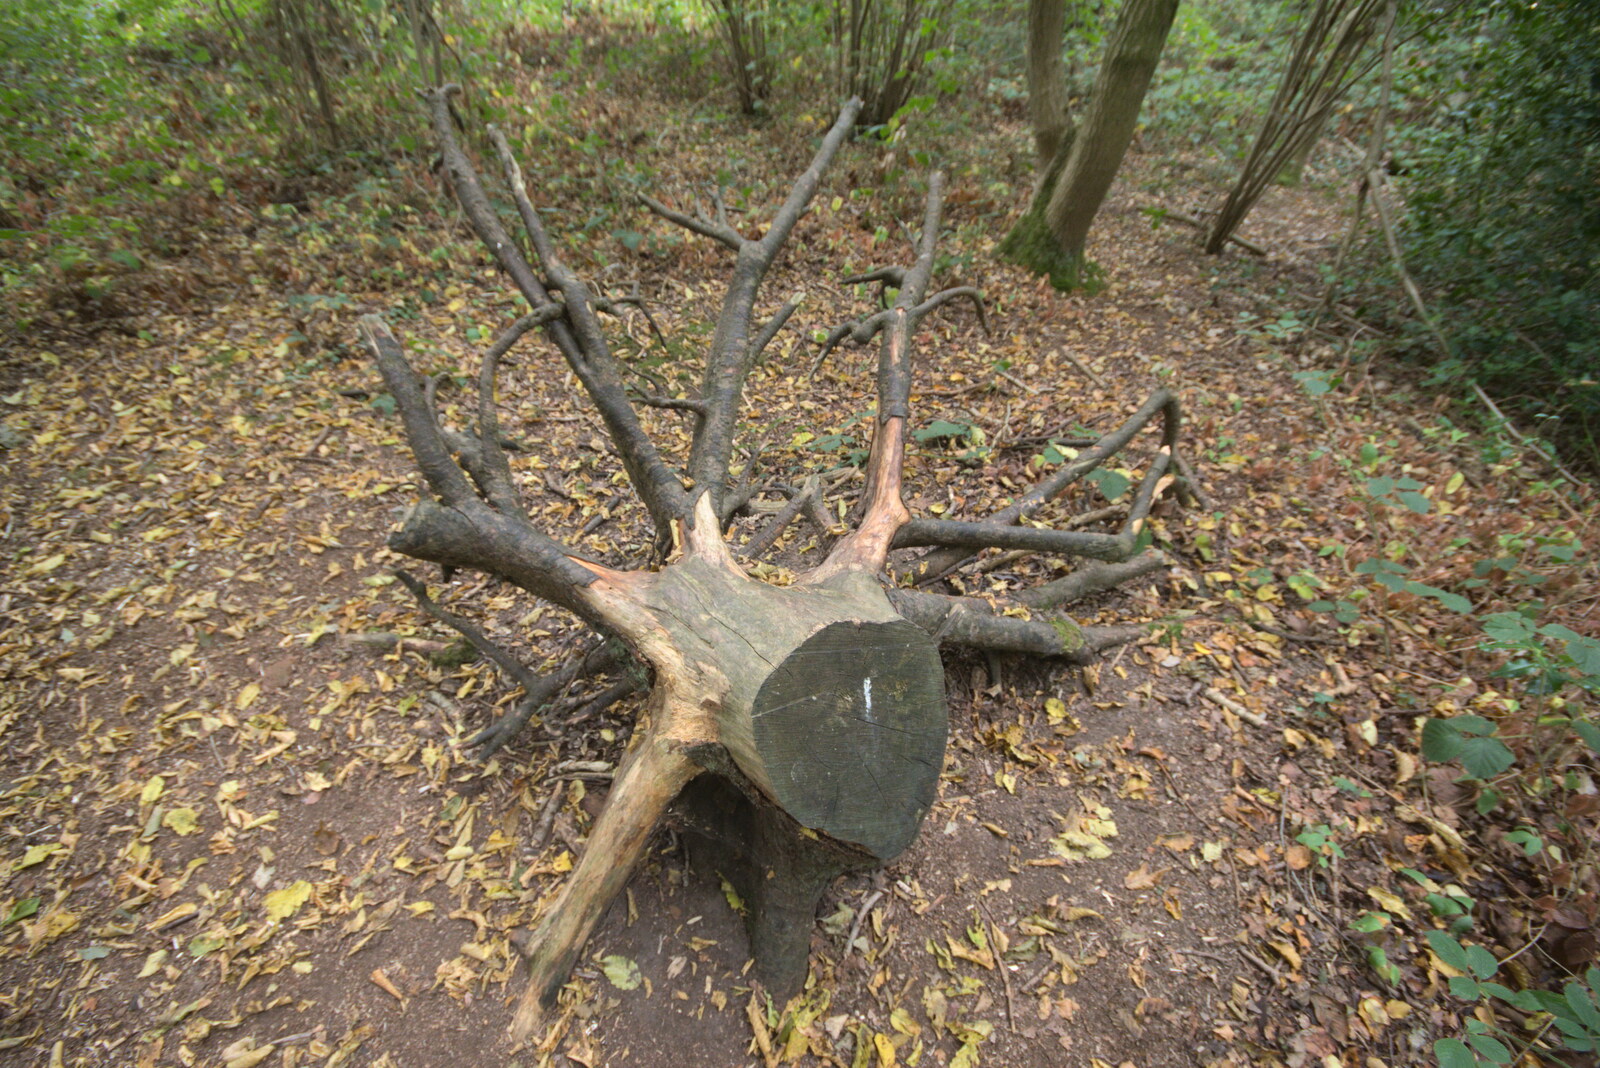 A nice tree stump from Jules Visits, and a Trip to Tyrrel's Wood, Pulham Market, Norfolk - 16th August 2020